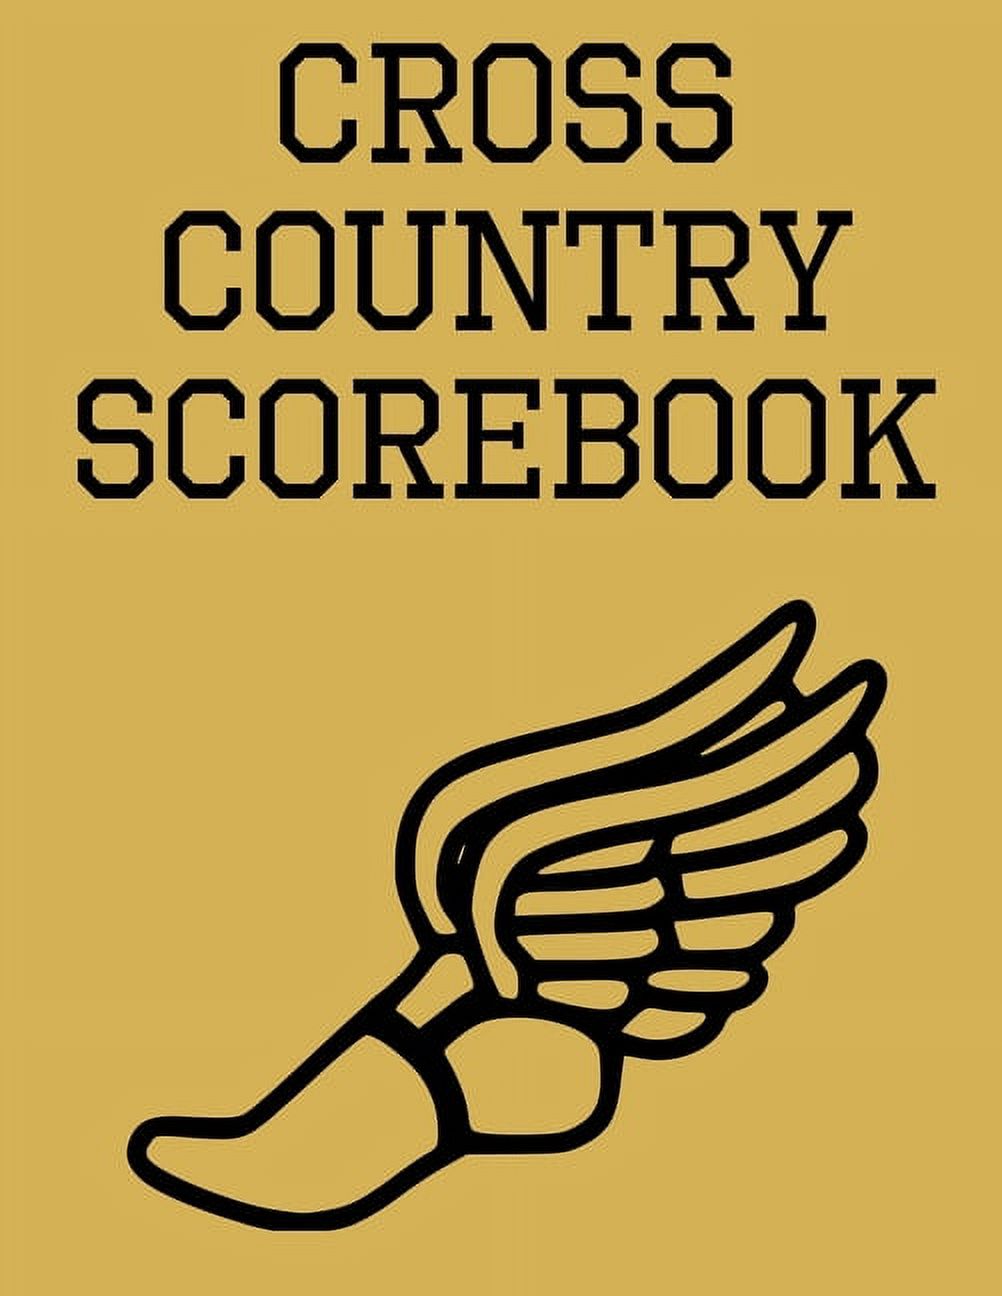 Cross Country Scorebook : Cross Country Organizer Featuring Scoresheets, Calendar, and Meet Notes (Paperback) - image 1 of 1